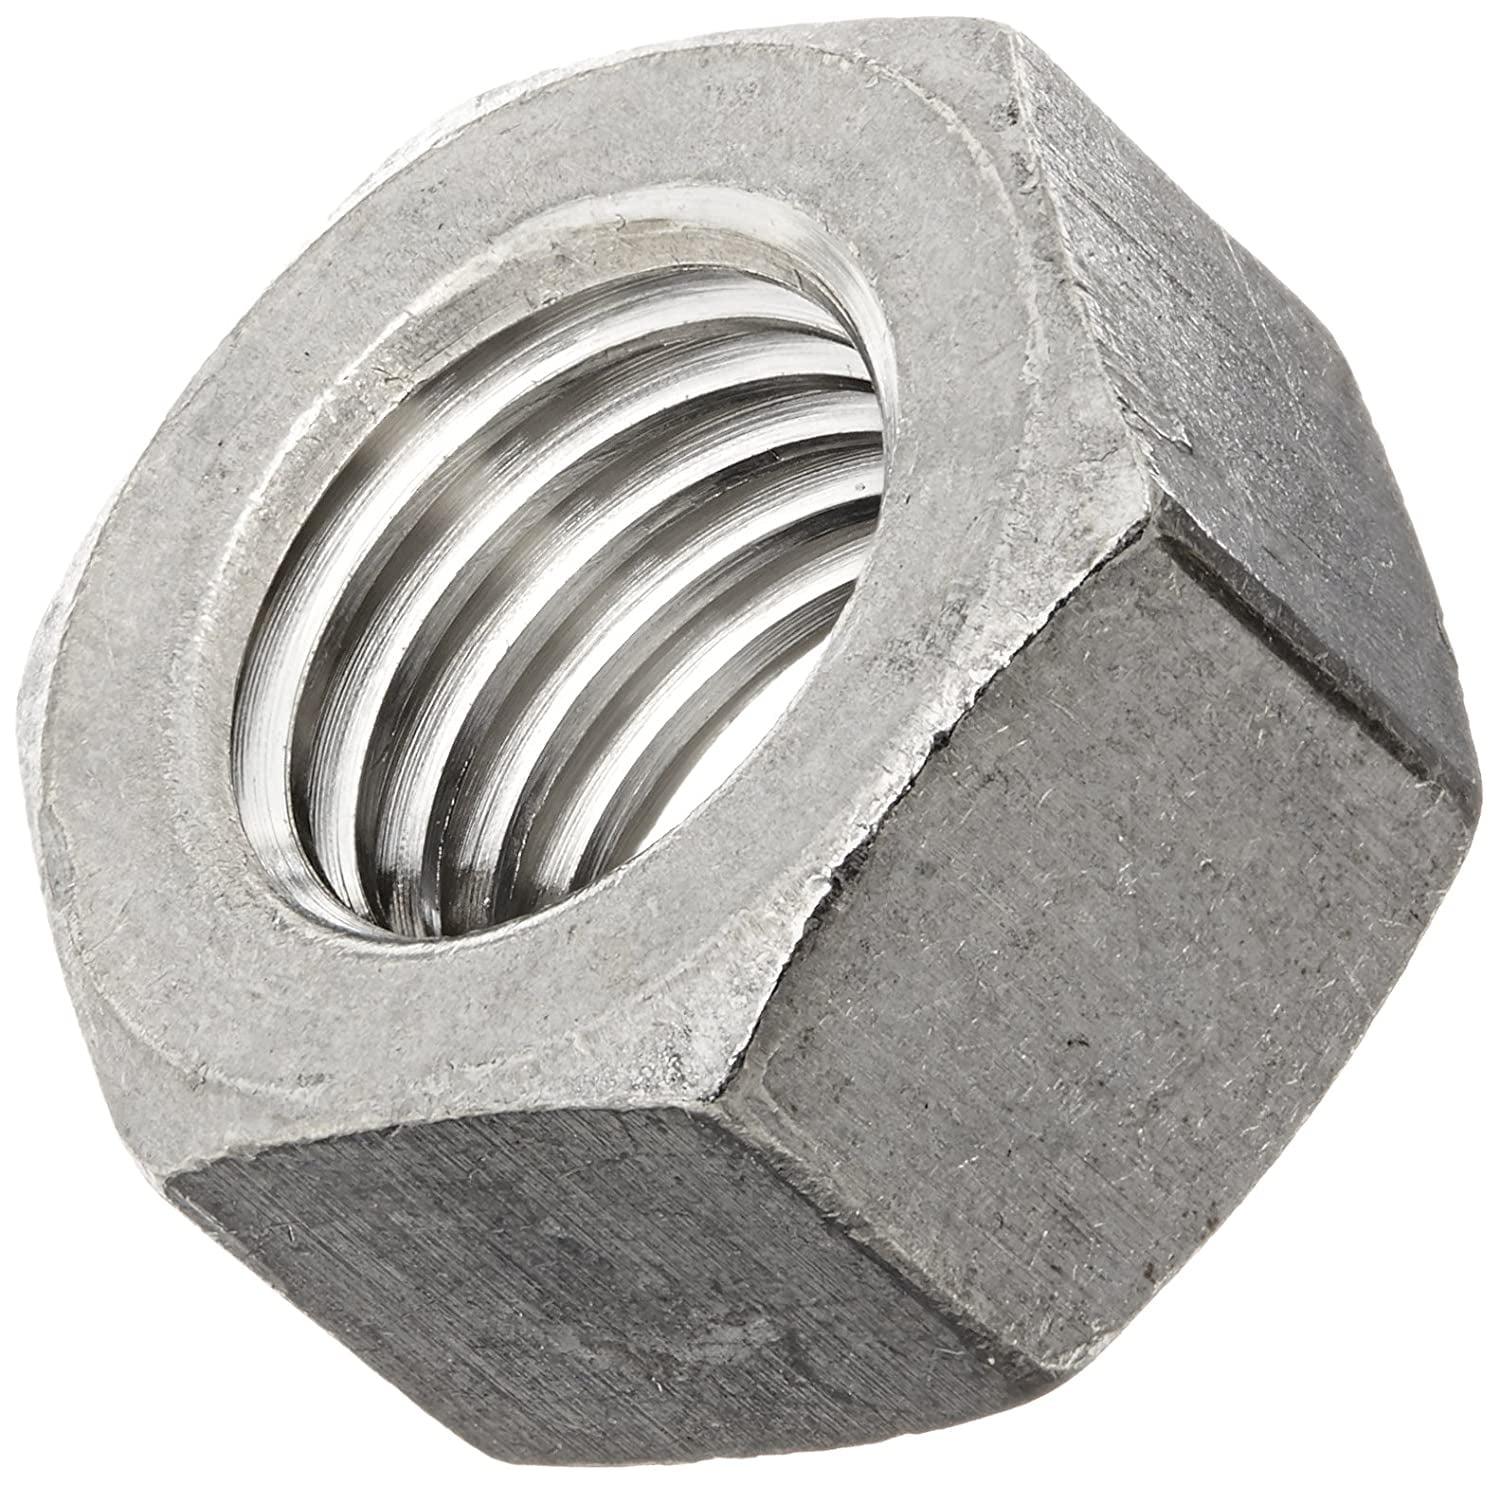 ASME B18.2.2 Steel Hex Jam Nut Zinc Plated Finish 1/4 Thick 11/16 Width Across Flats 7/16-20 Thread Size Pack of 100 Grade 2